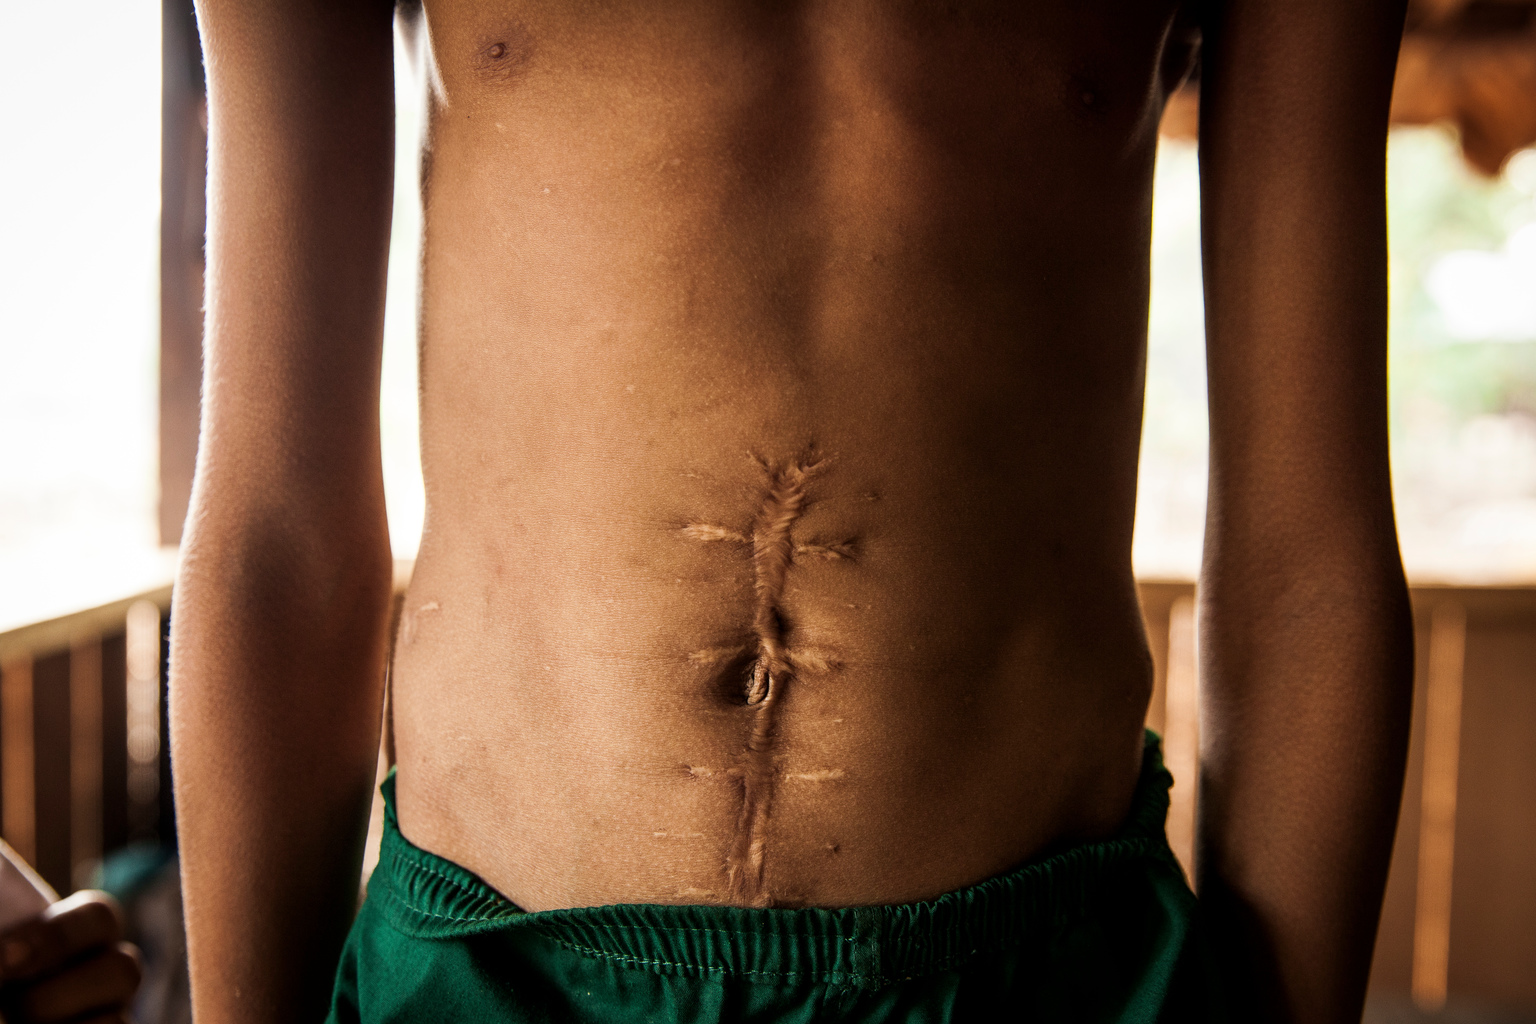 Min Thiya, 10, shows a large scar from injuries he sustained two-years ago when he and a group of his friends were playing with unexploded ordnance that killed his friend So Aung Myo Win instantly and injured four others, including Min, at the Ann Ka Law village in Kayin State in Myanmar, Monday 3 April 2017. In 2017, working with the Government of Myanmar, UNICEF will strive to meet the basic needs of the most vulnerable internally displaced children. Myanmar is experiencing three protracted humanitarian crises, each with its own set of complex underlying factors. In Rakhine State, inter-communal violence that erupted in 2012 continues to plague 120,000 internally displaced people spread across 40 camps or informal sites, as well as host communities. Eighty per cent of the displaced are women and children. In Kachin State, armed conflict that reignited in 2011 continues to impact communities caught in the crossfire between an ethnic armed group and the Myanmar army. Nearly 87,000 people remain displaced as a result, including 40 per cent who are in areas outside of government control. An additional 11,000 people remain displaced in northern Shan State, where a similar conflict broke out in 2011. Compounding the protracted crises are issues related to religious and/or ethnic discrimination, exploitation, chronic poverty, vulnerability to natural disasters, statelessness, trafficking and humanitarian access. In addition to the humanitarian crises in Rakhine, Kachin and Shan states, Myanmar is impacted by humanitarian situations in other parts of the country, including natural disasters, health emergencies and small-scale displacements.